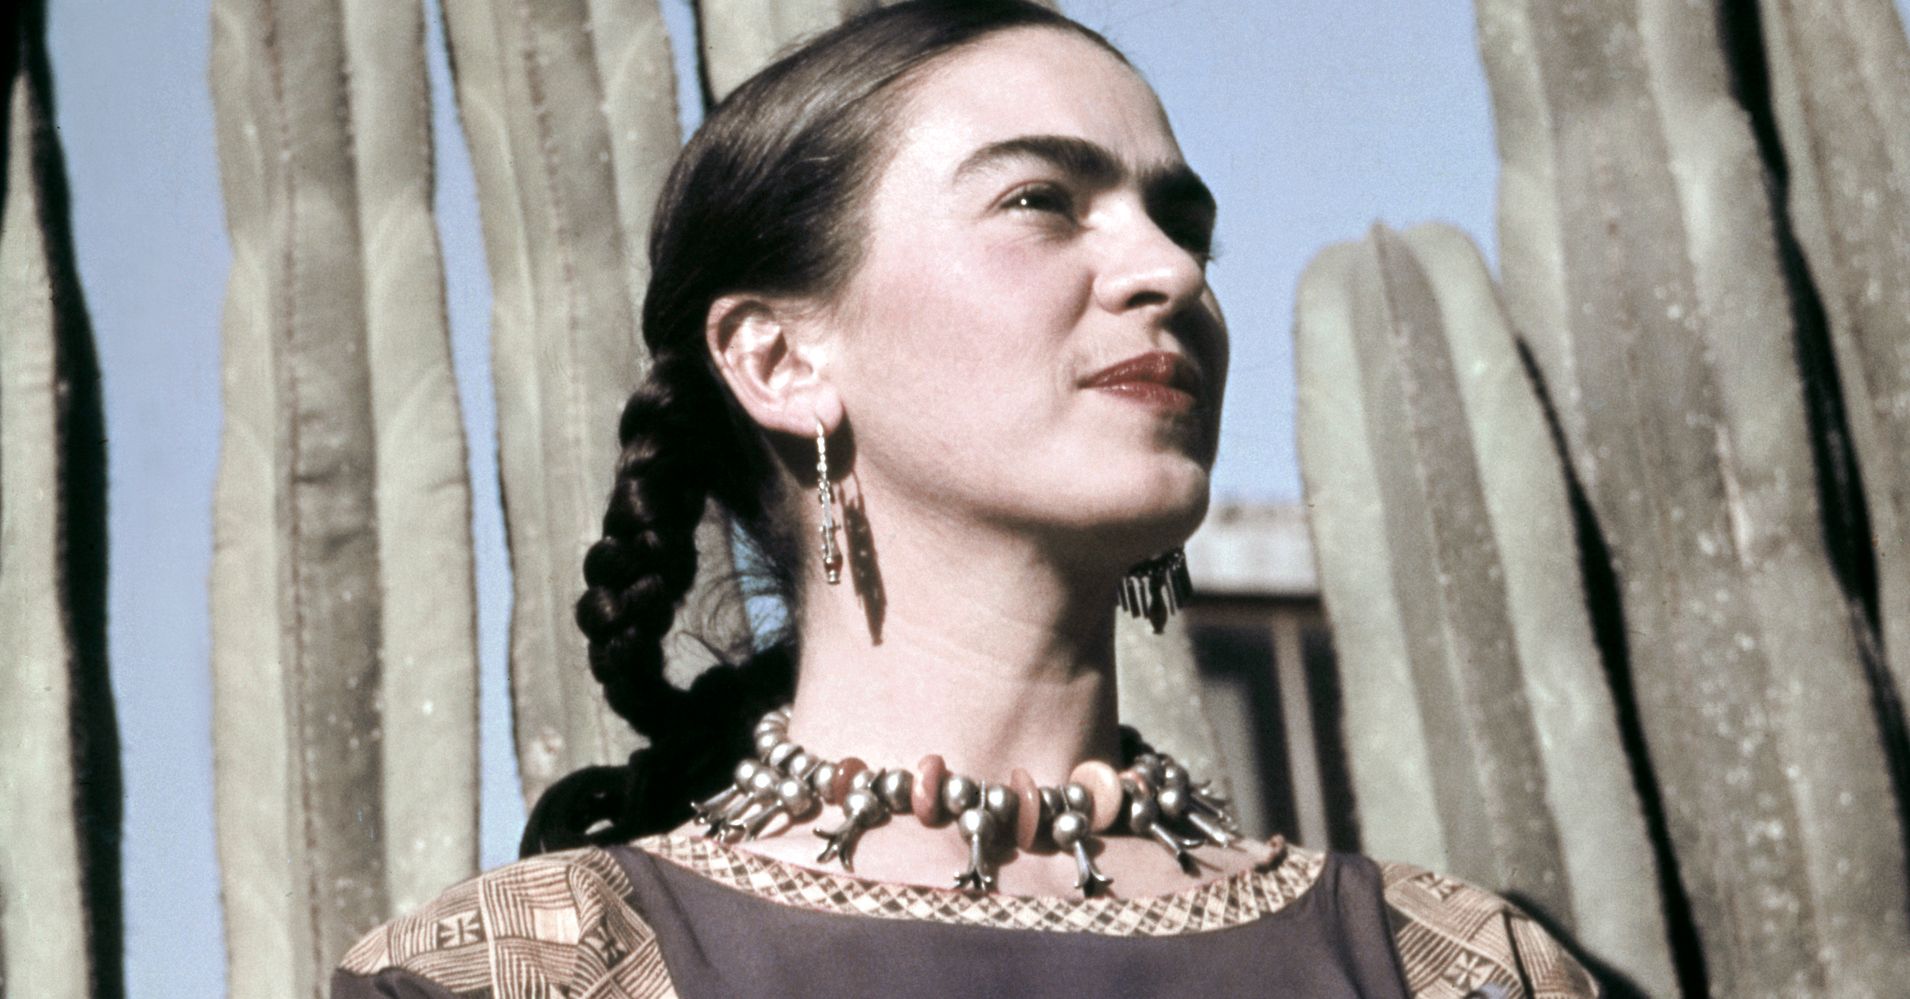 How To Be More Like Frida Kahlo, As Told By Frida Kahlo 